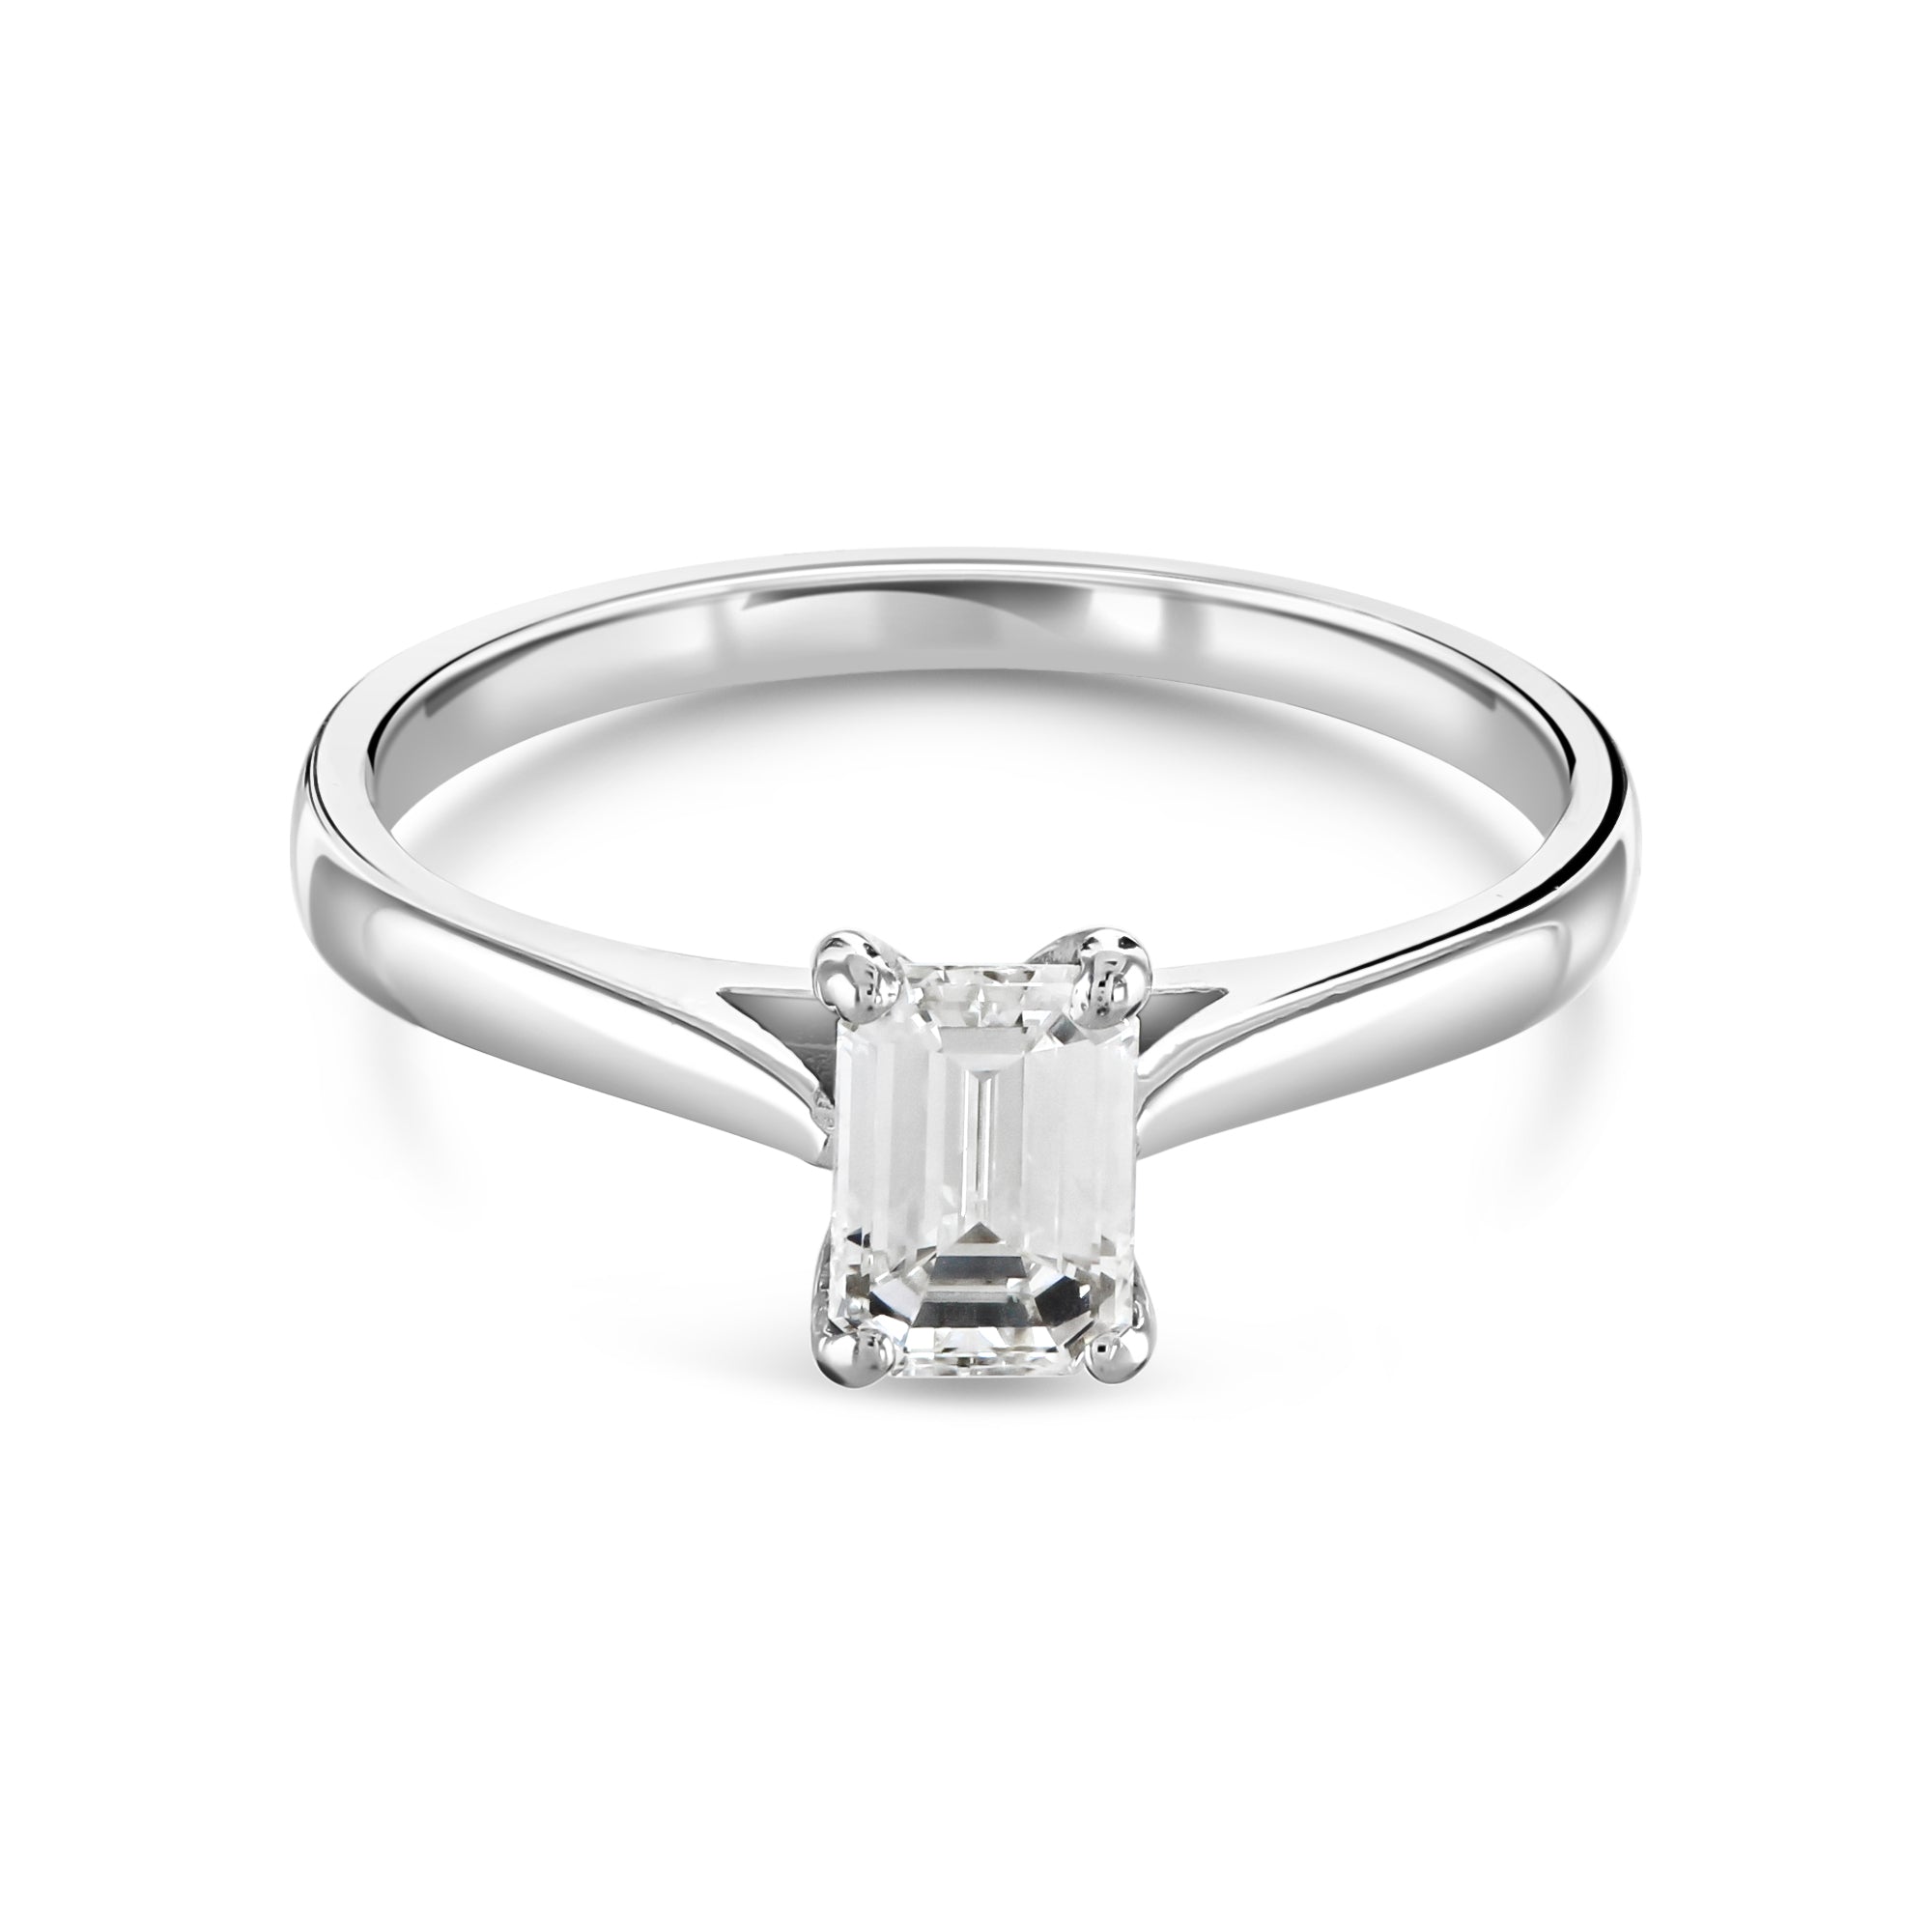 Ring - Emerald Cut Diamond Solitaire Ring